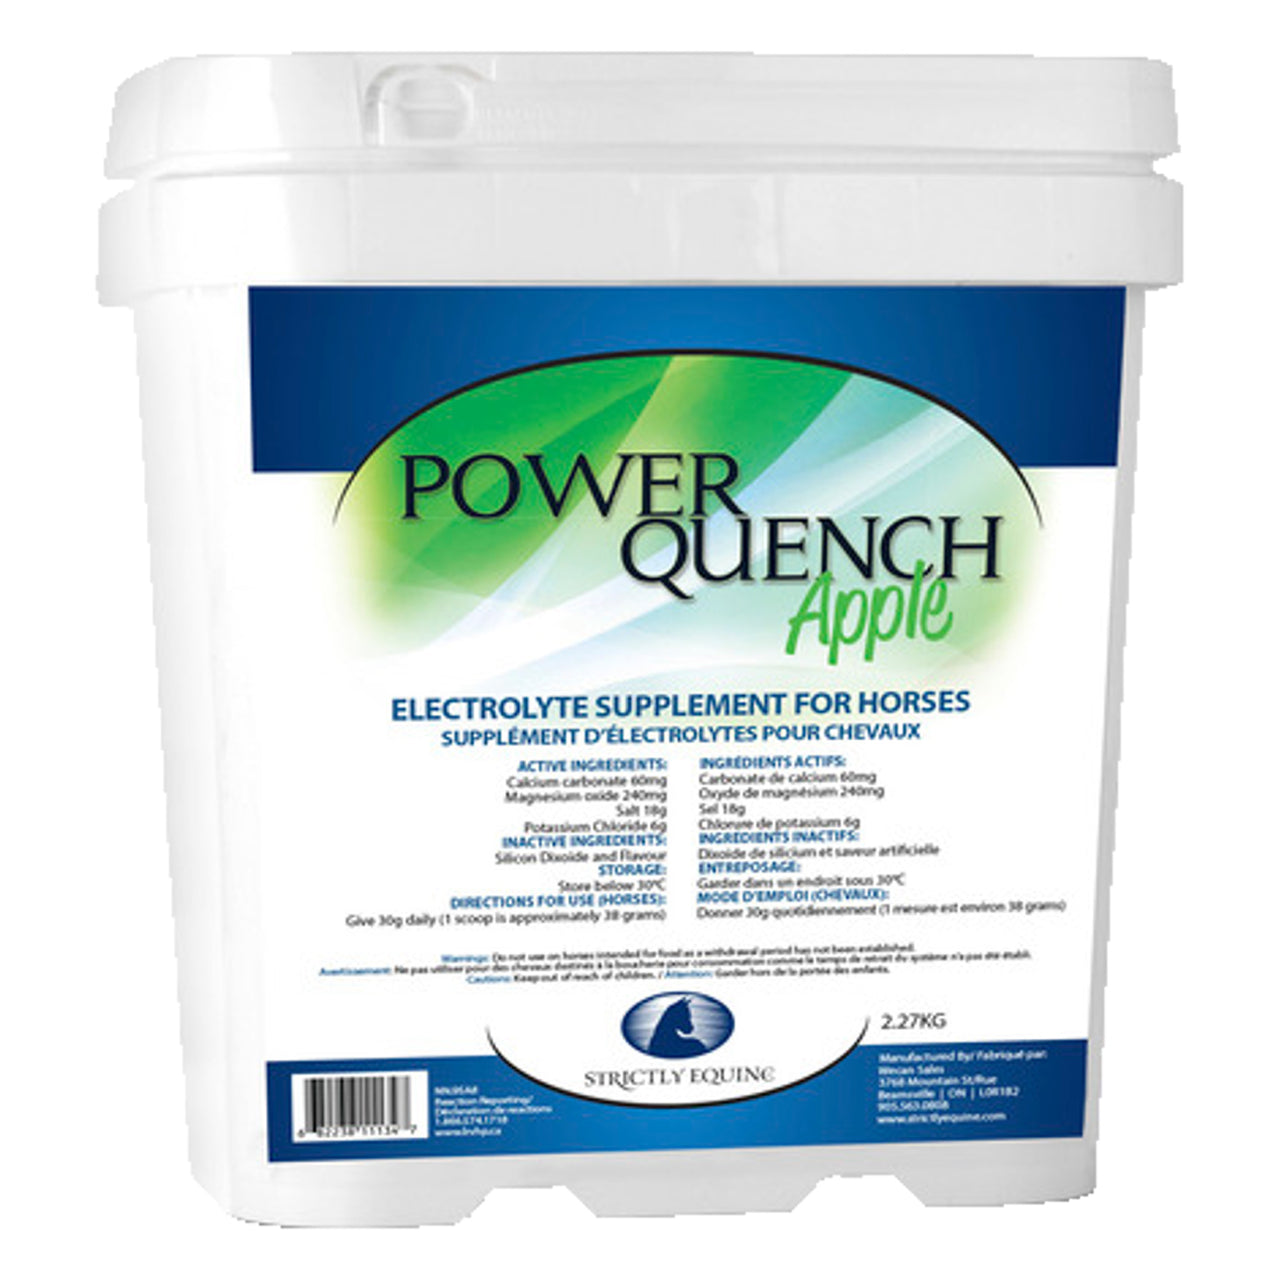 Strictly Equine Power Quench Apple 2.27g